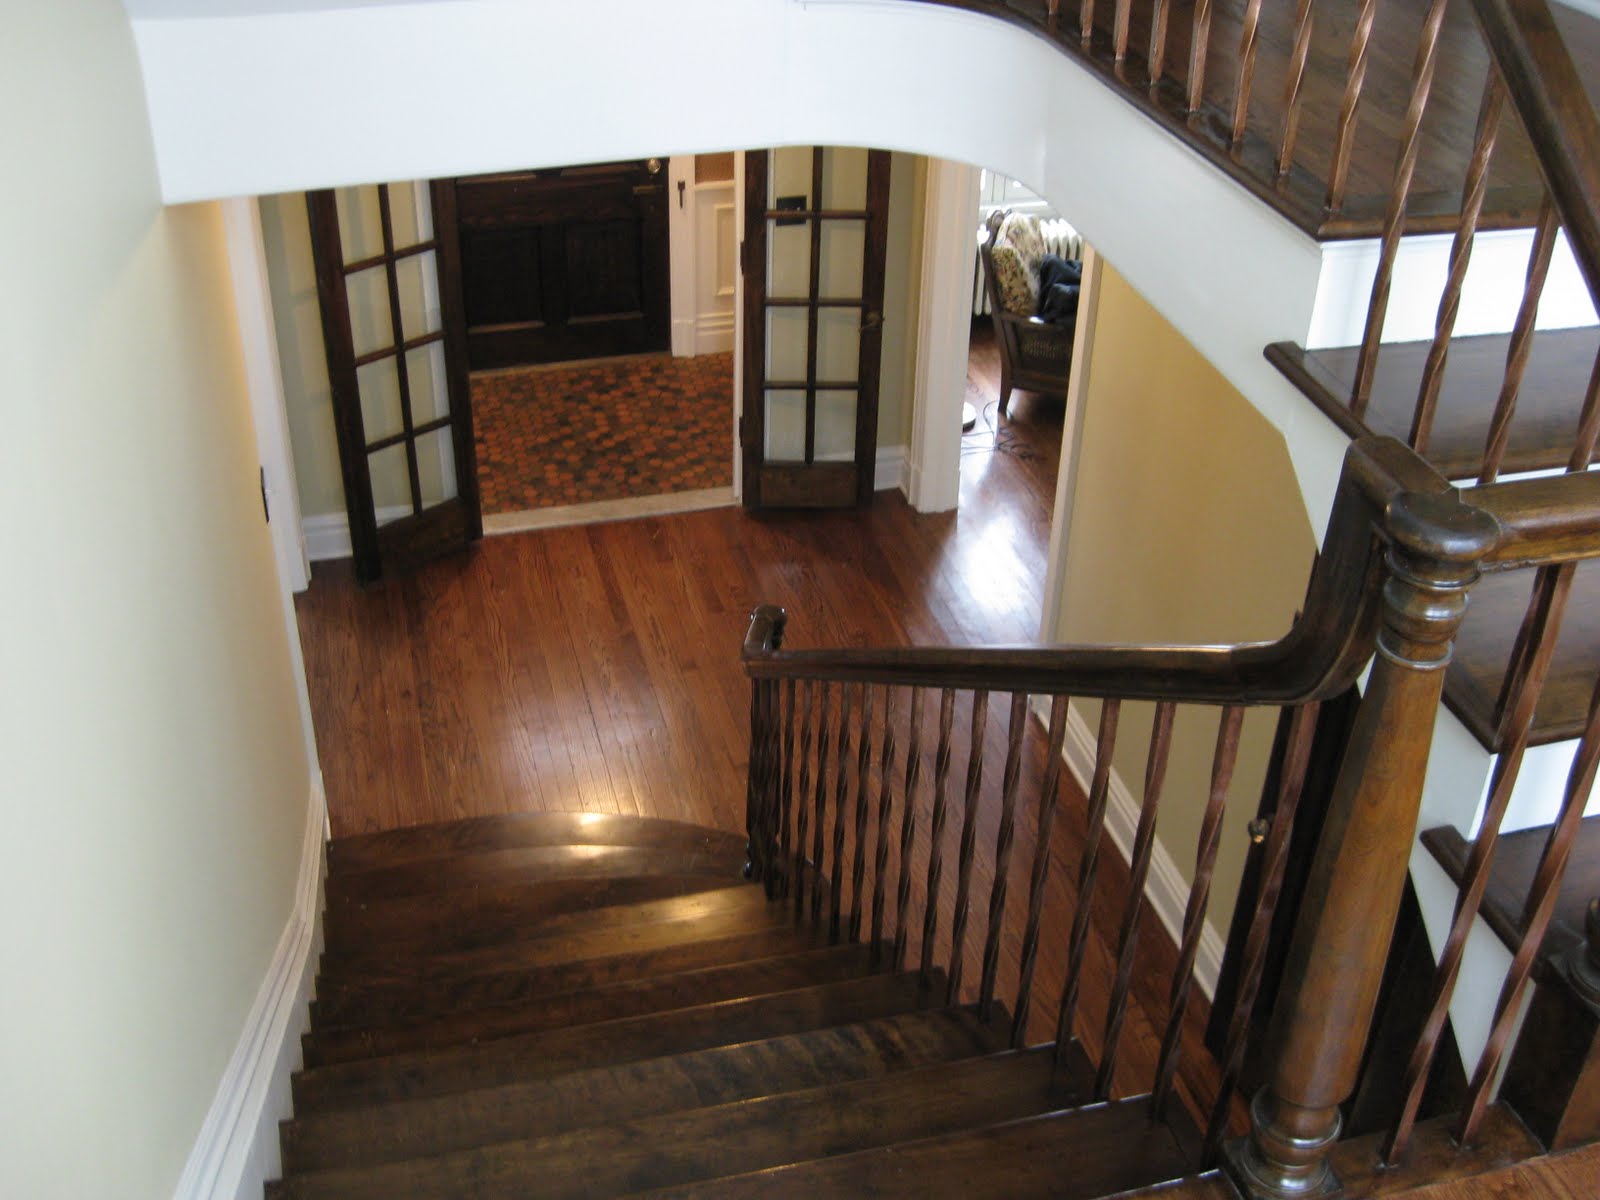 Wooden Style Basement Stunning Wooden Style Staircase Painting Basement Floor Design Equipped With Wooden Material Of Staircase With Wooden Flooring Unit  Painting Basement Floor For The Least Expensive Solution 